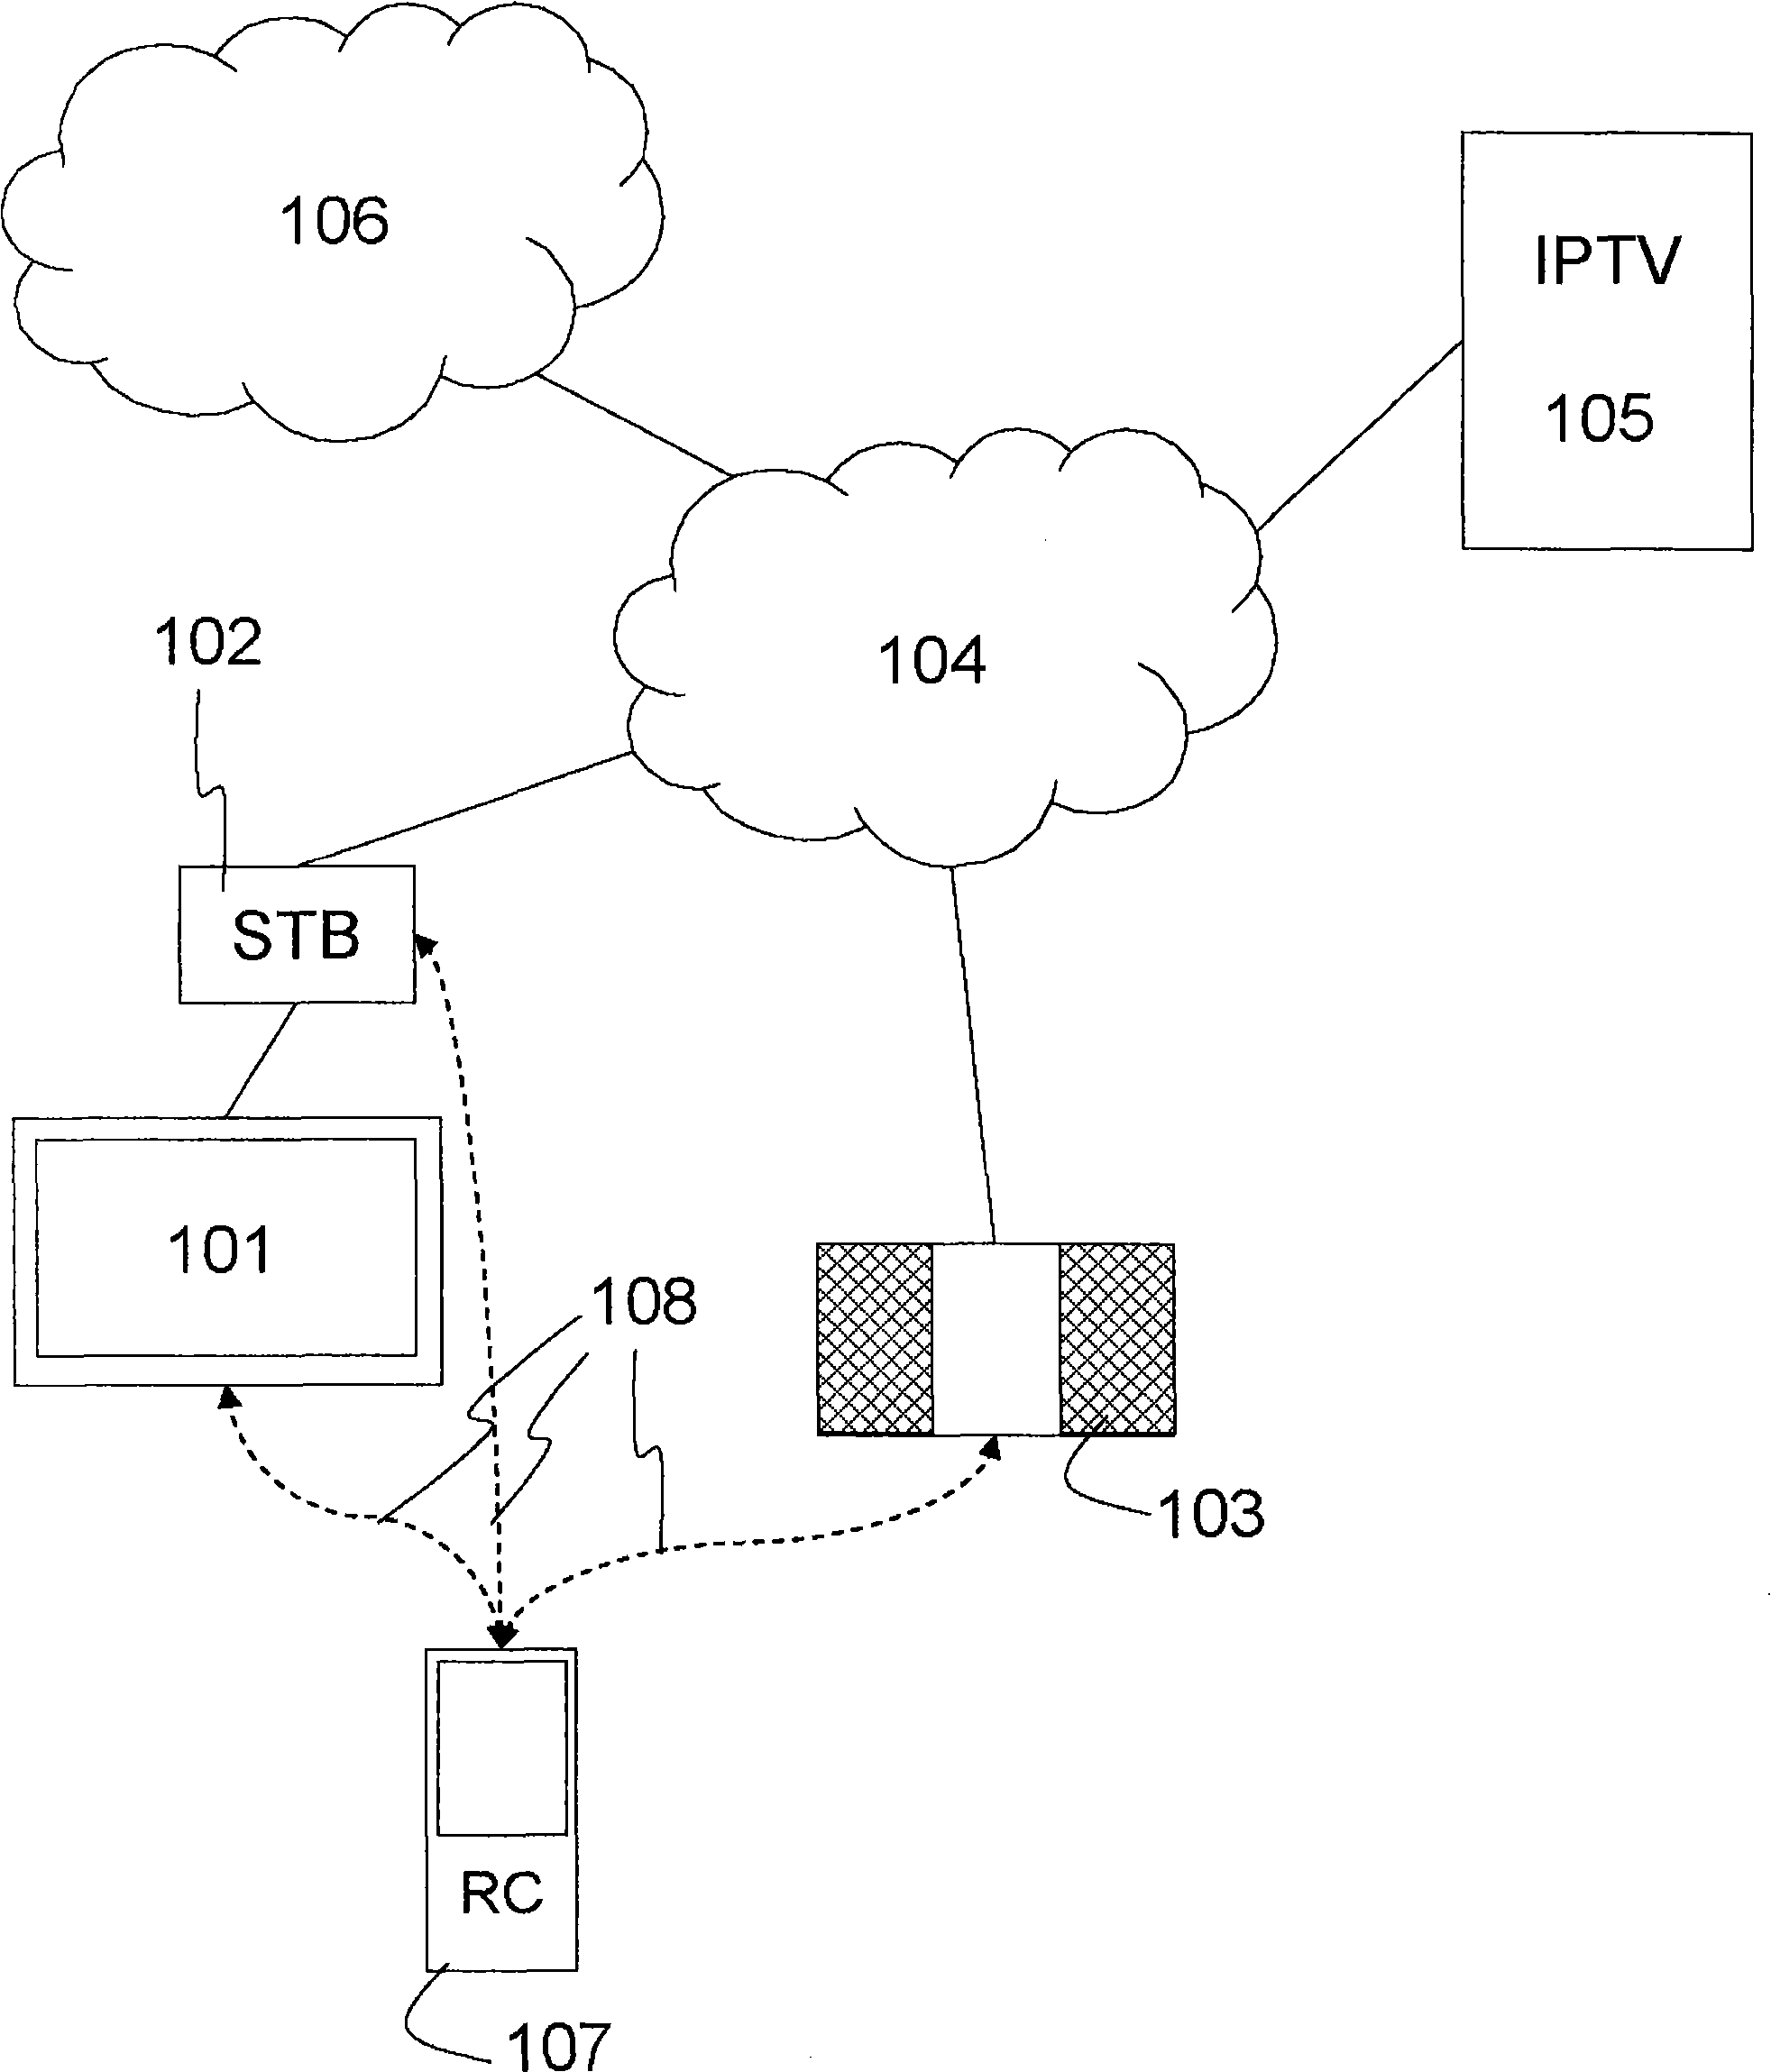 Remote control for devices with connectivity to a service delivery platform